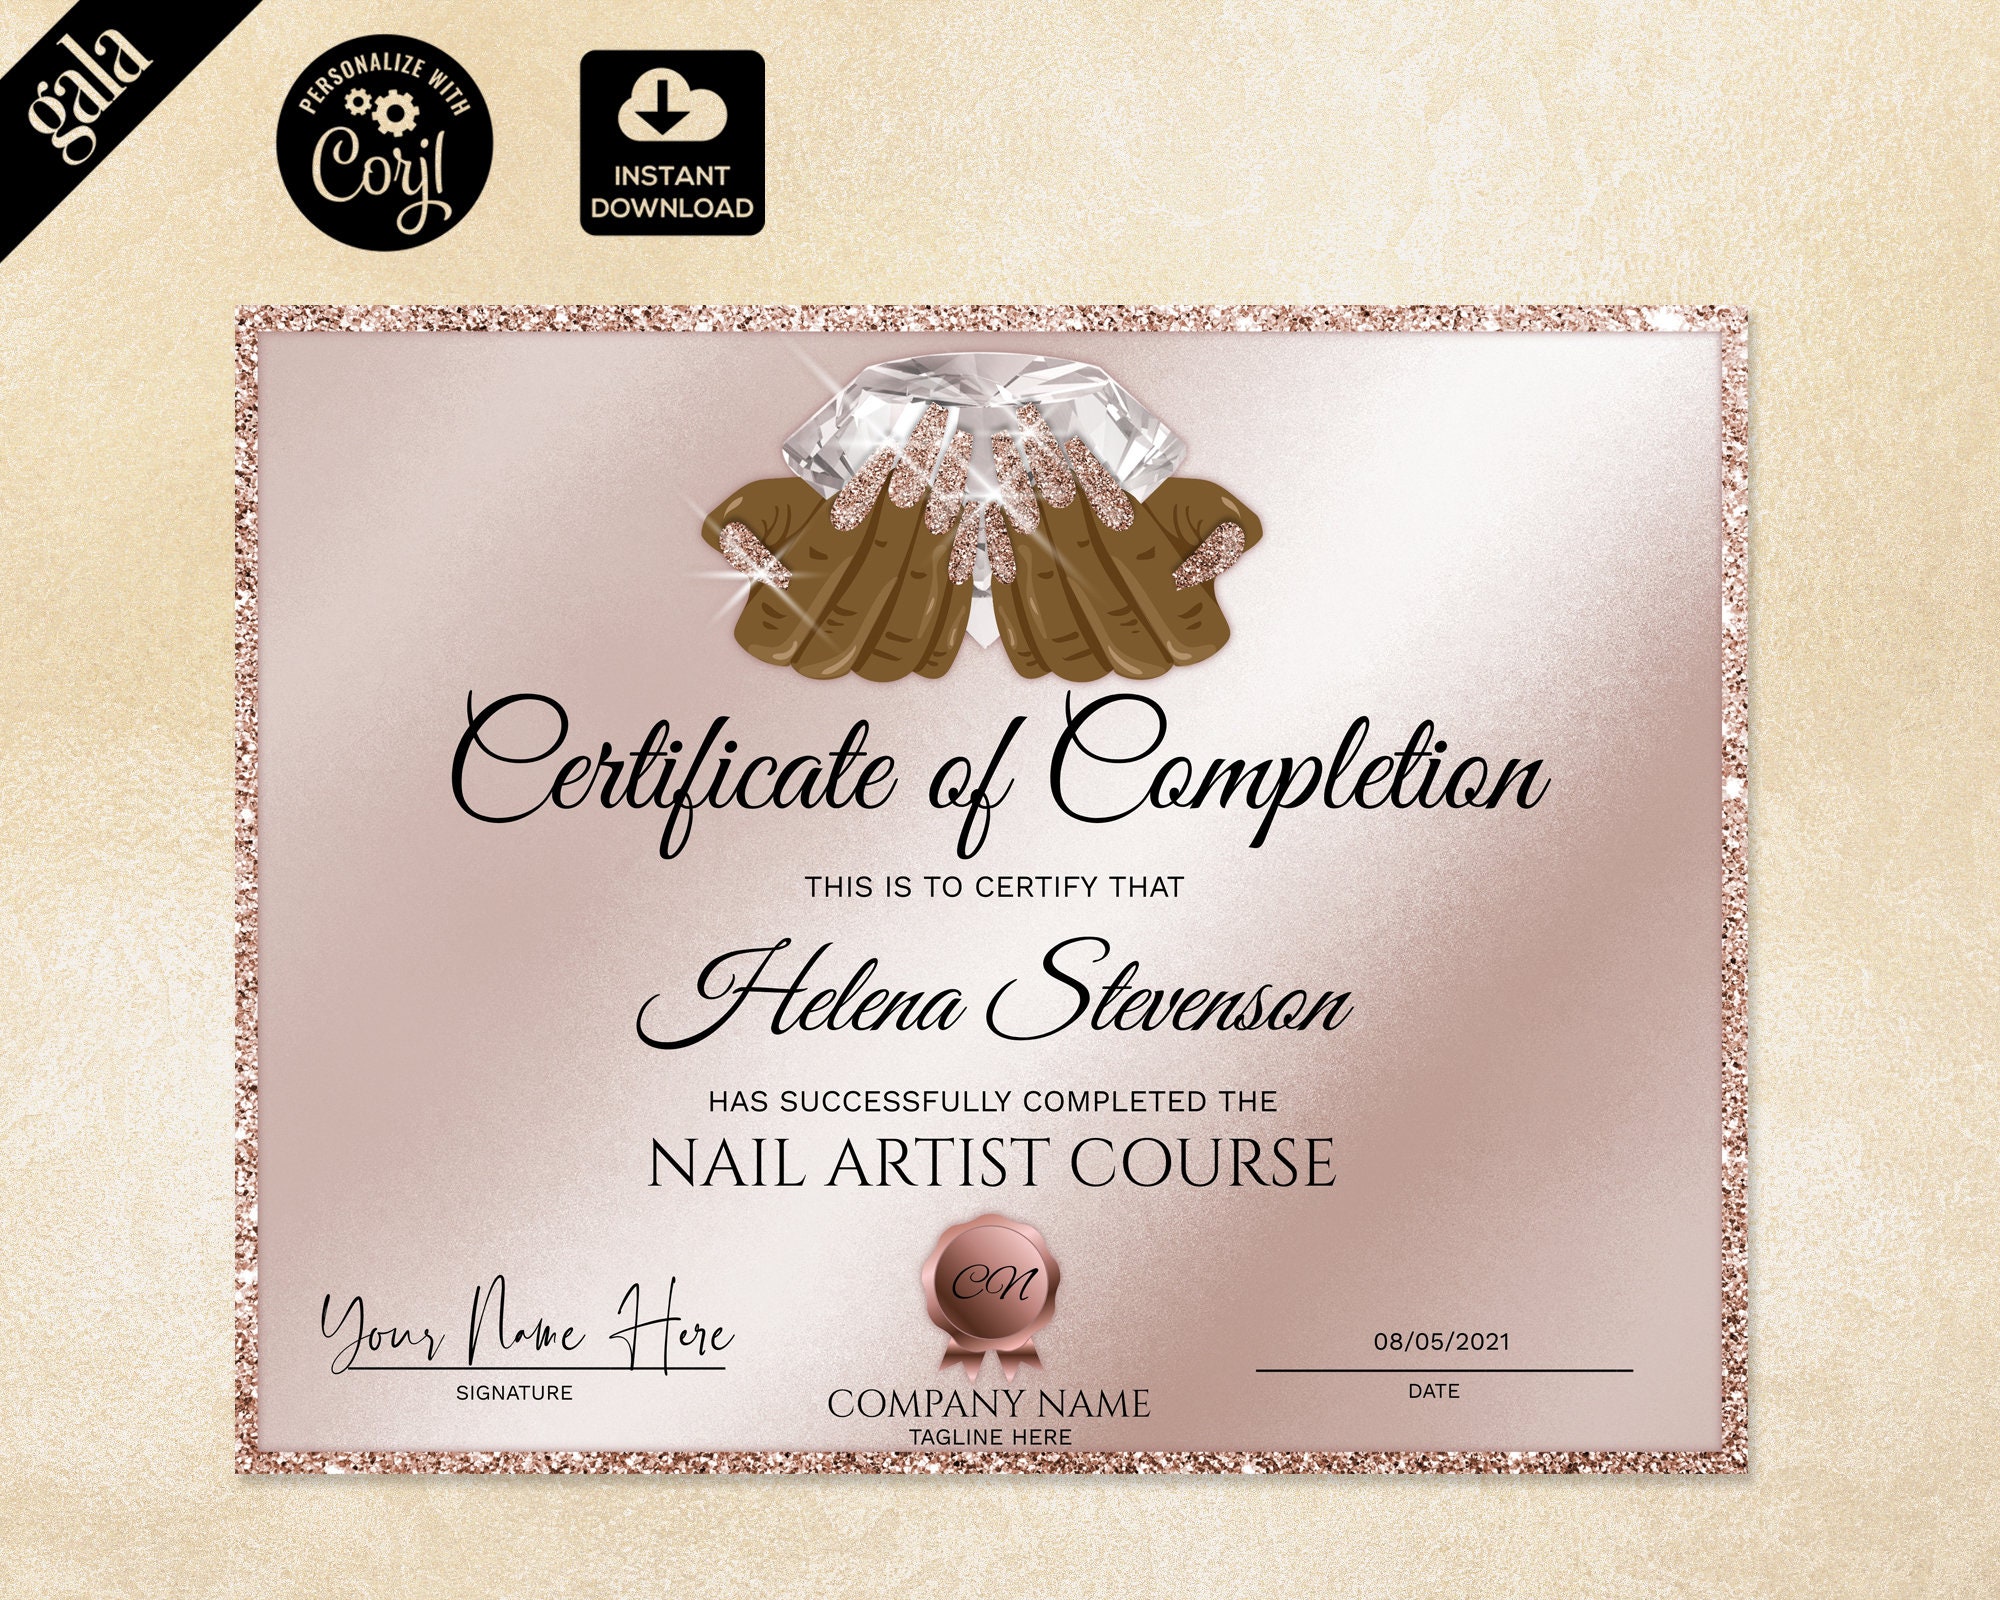 10. Nail Art Certificate of Completion - wide 6